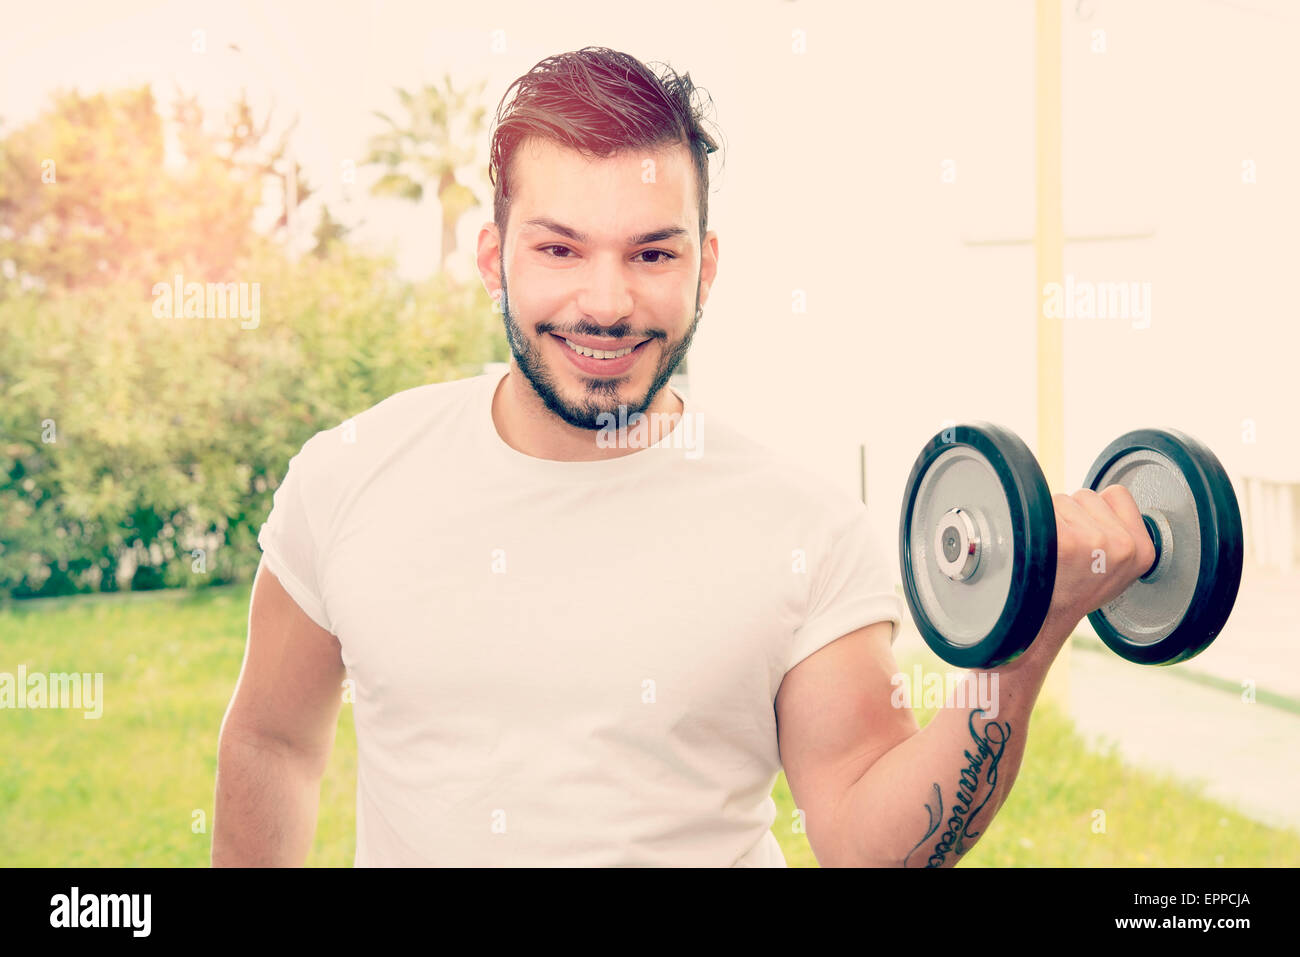 a smiling young man during his fitness exercises outdoors warm filter applied Stock Photo